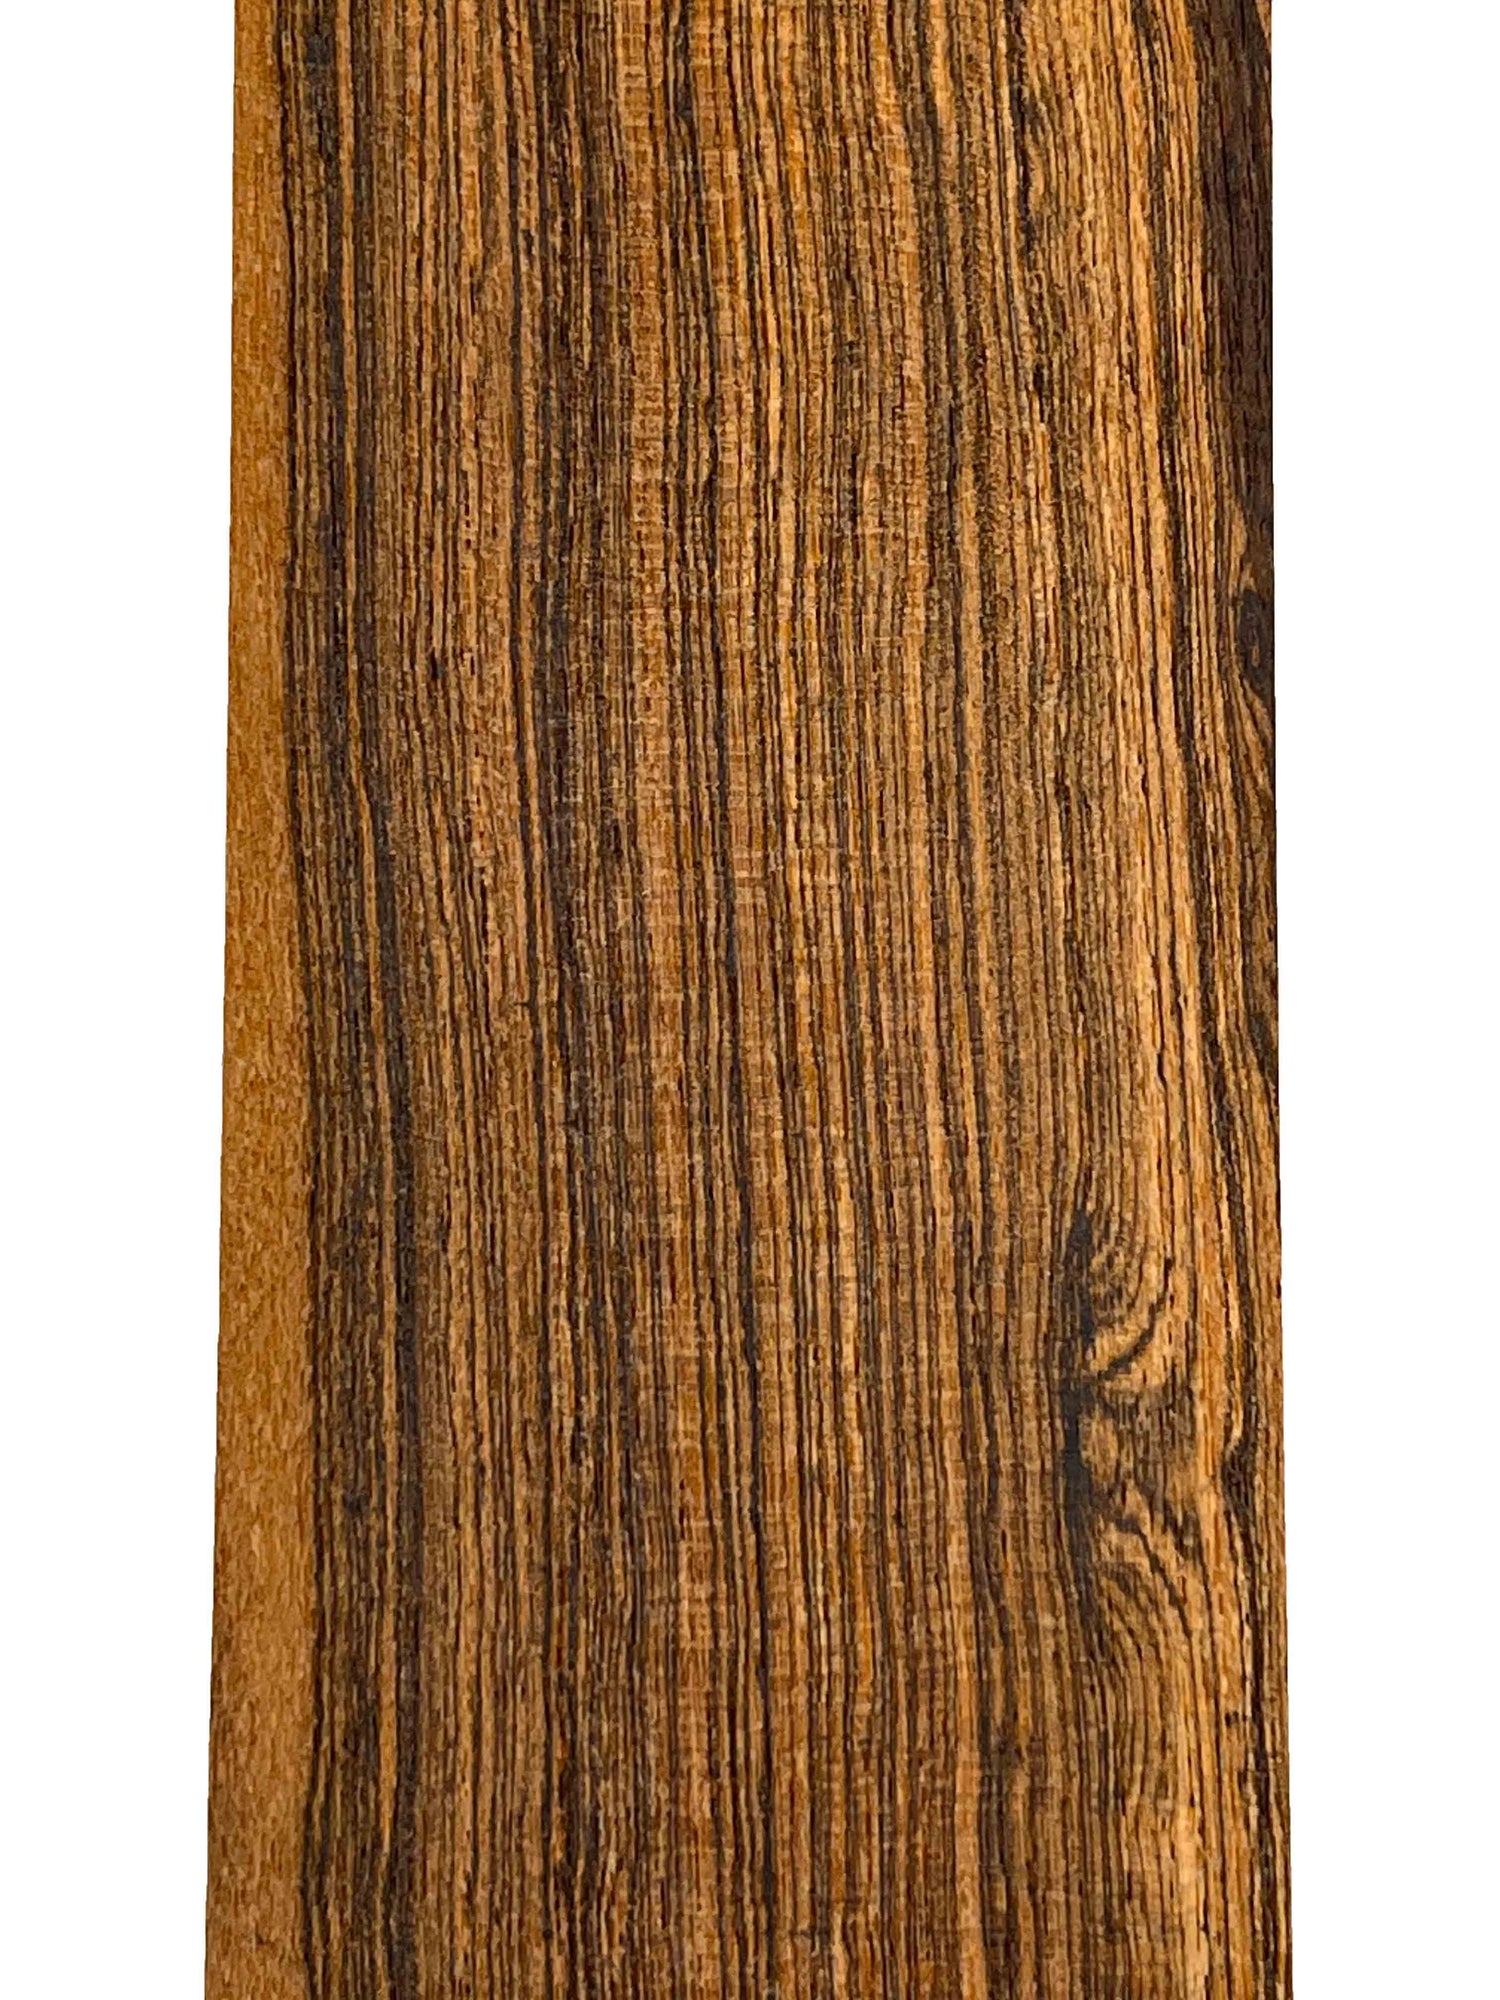 Bocote Thin Stock Lumber Boards Wood Crafts - Exotic Wood Zone - Buy online Across USA 